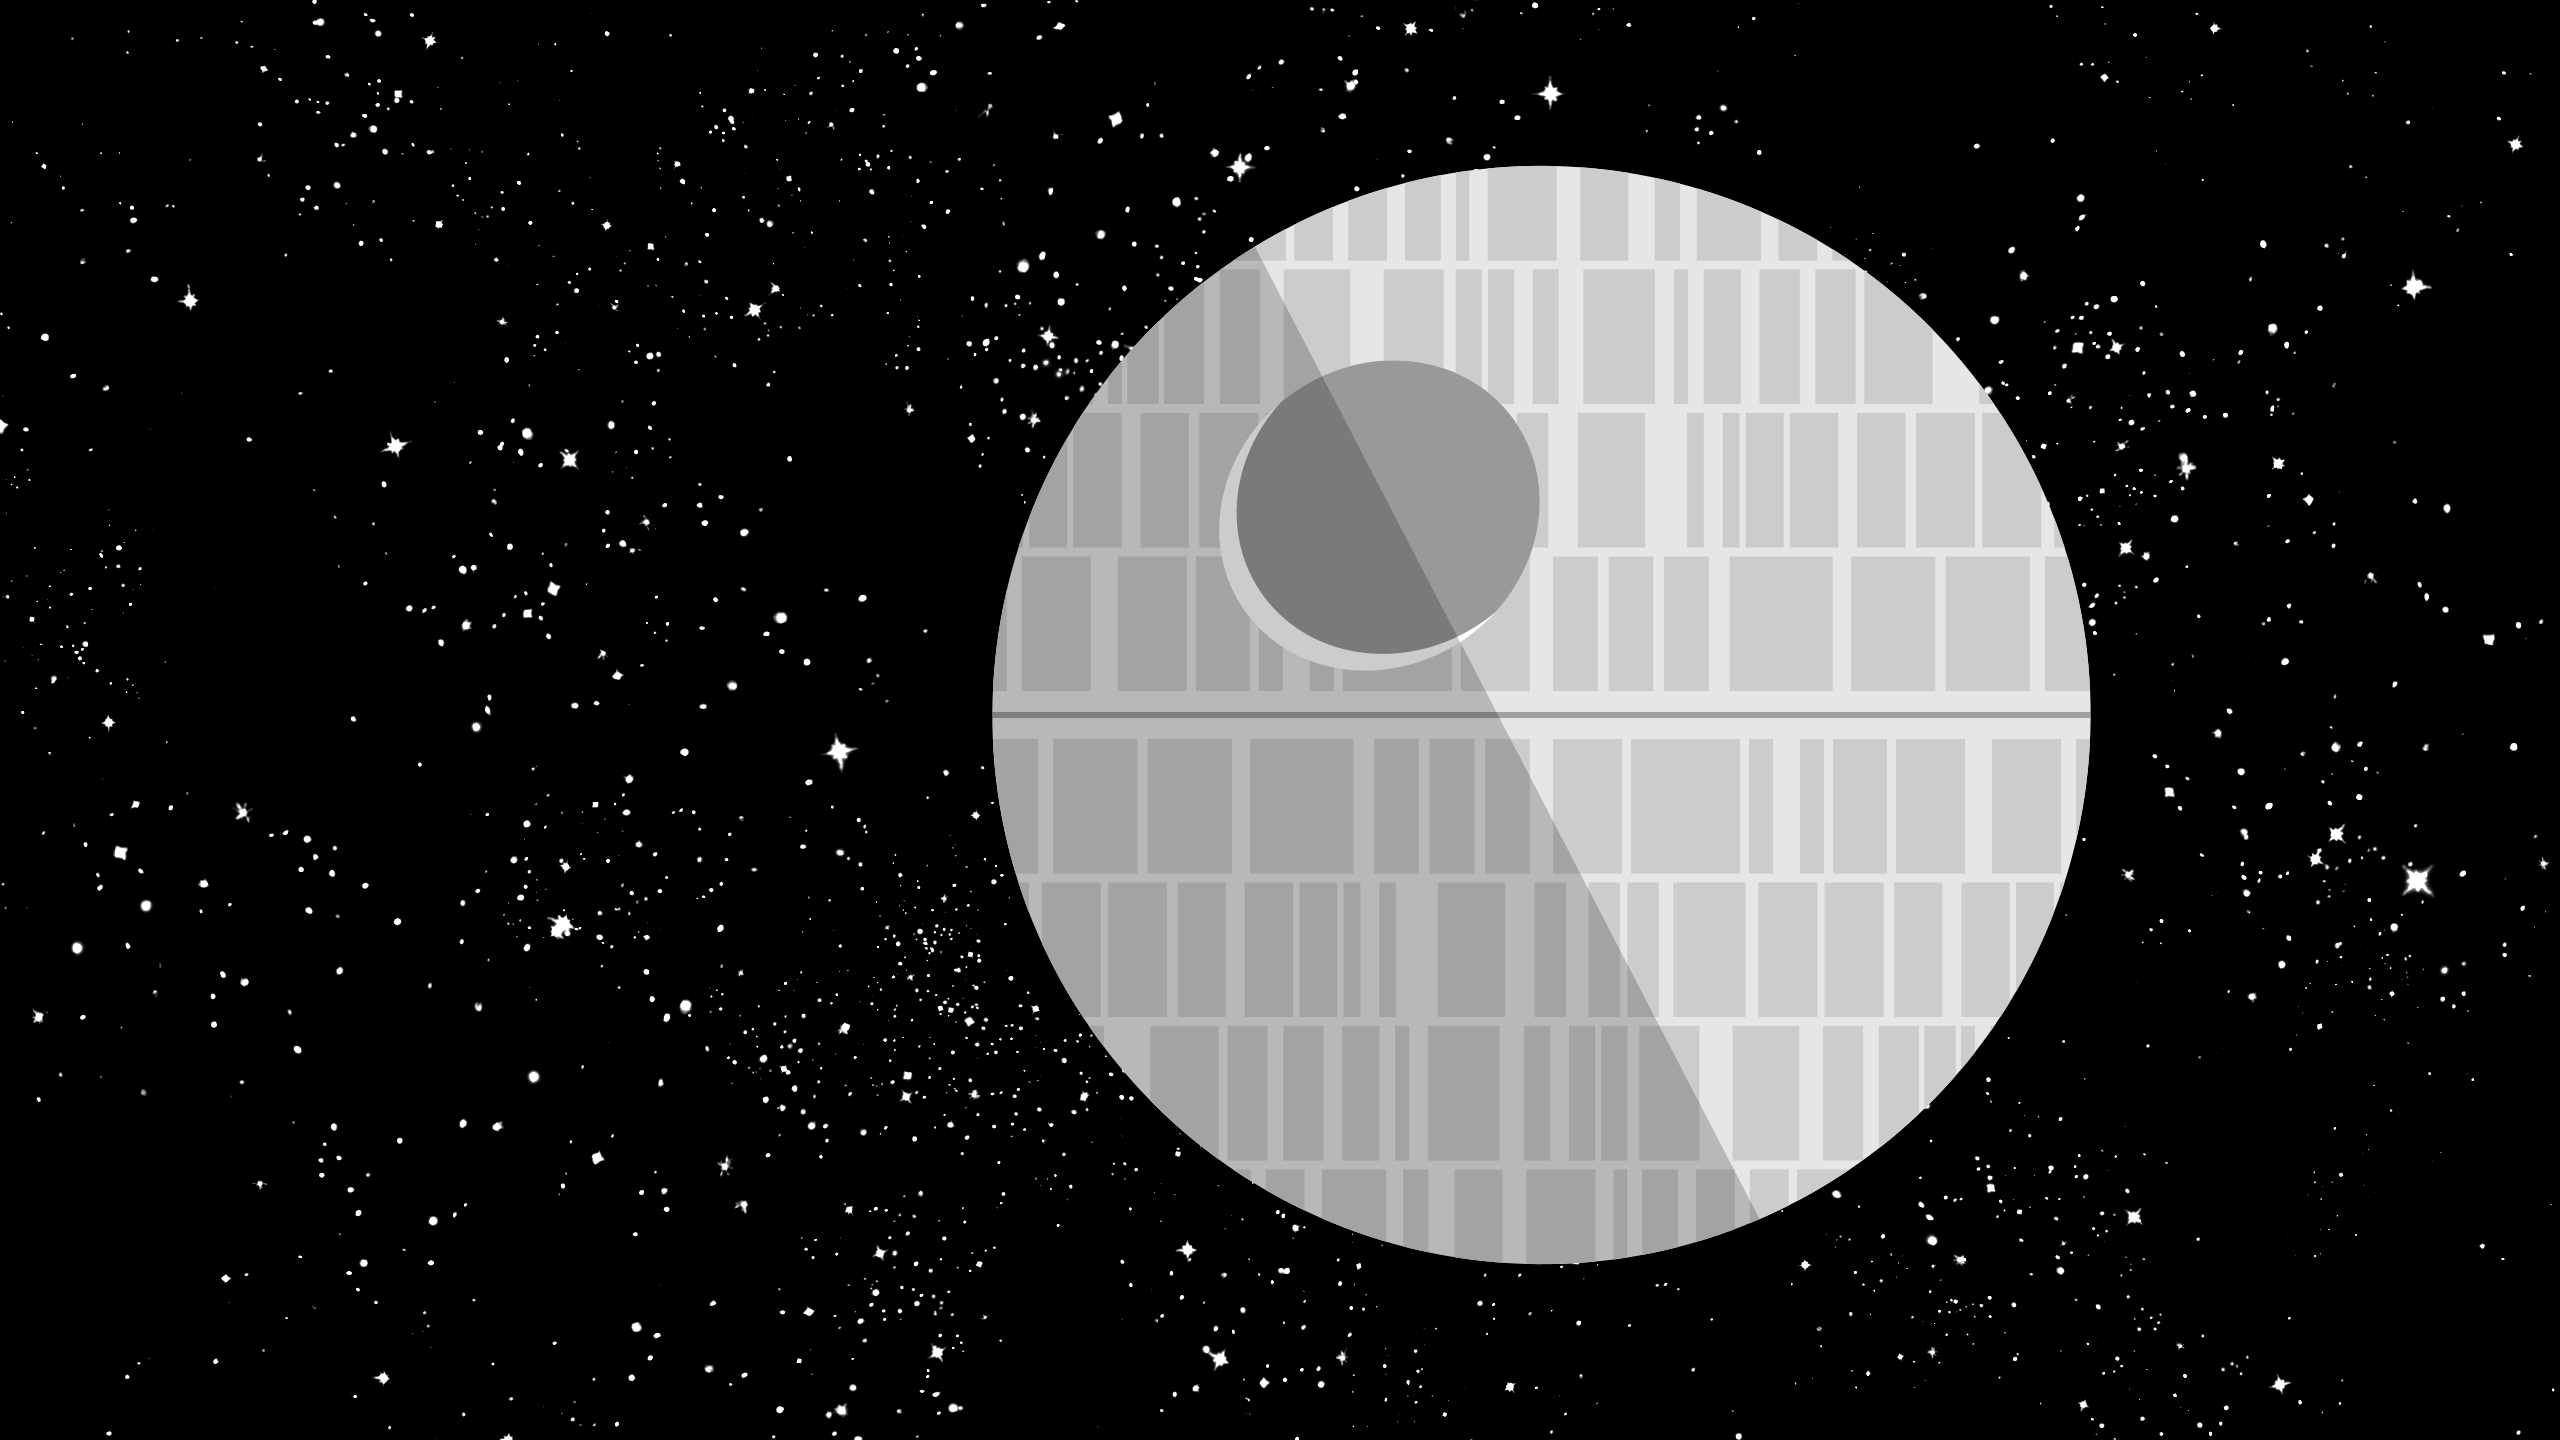 Big data and the Death Star